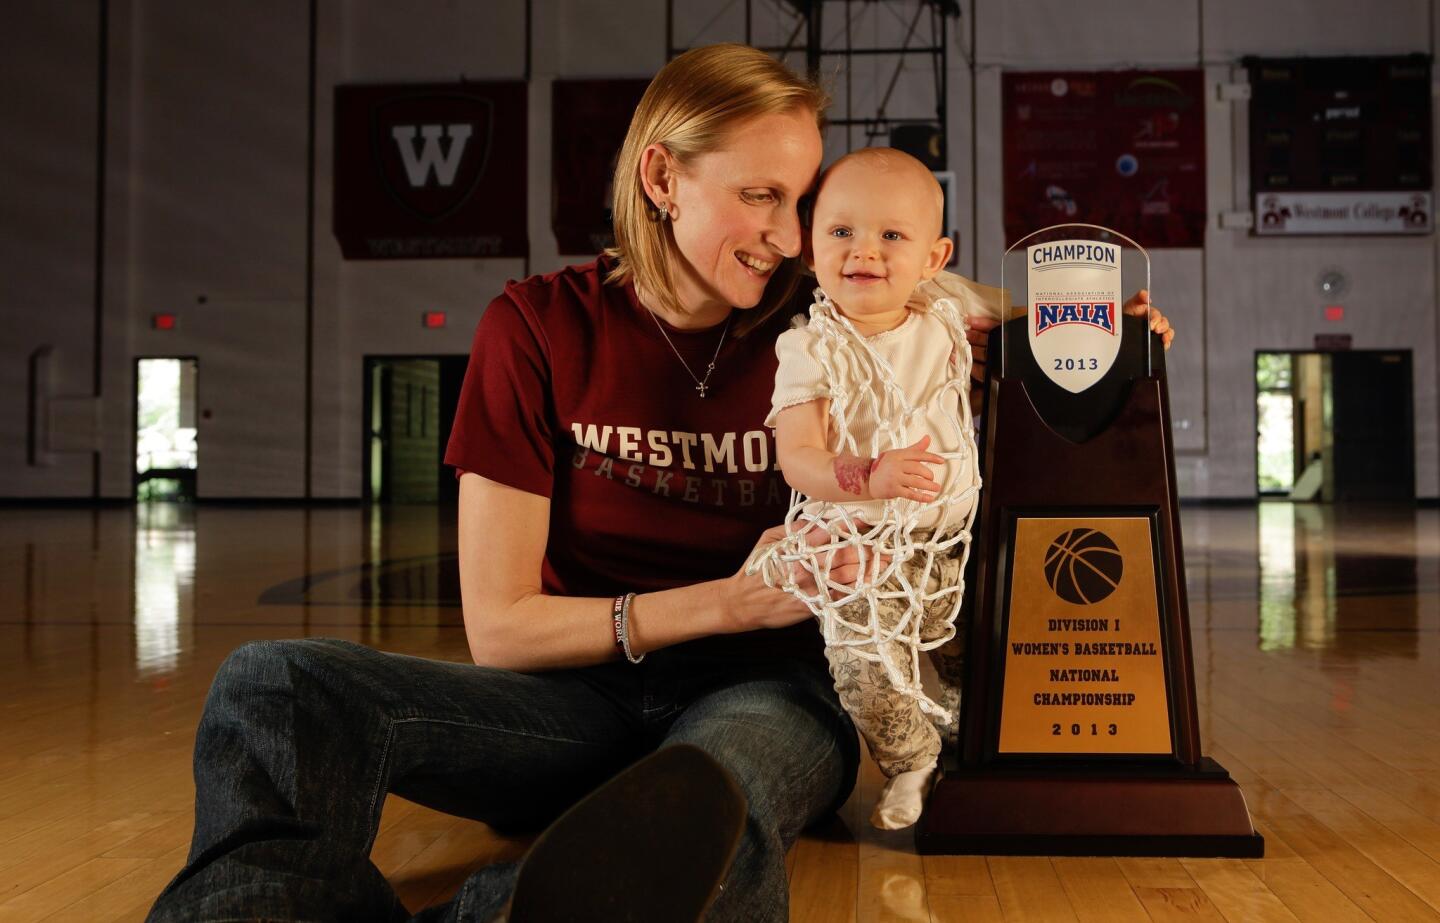 Kirsten Moore, women's basketball coach at Westmont College in Montecito, and daughter Alexis -- wearing the net that was cut down after the title game -- pose next to the 2013 NAIA championship trophy in the school's gym.